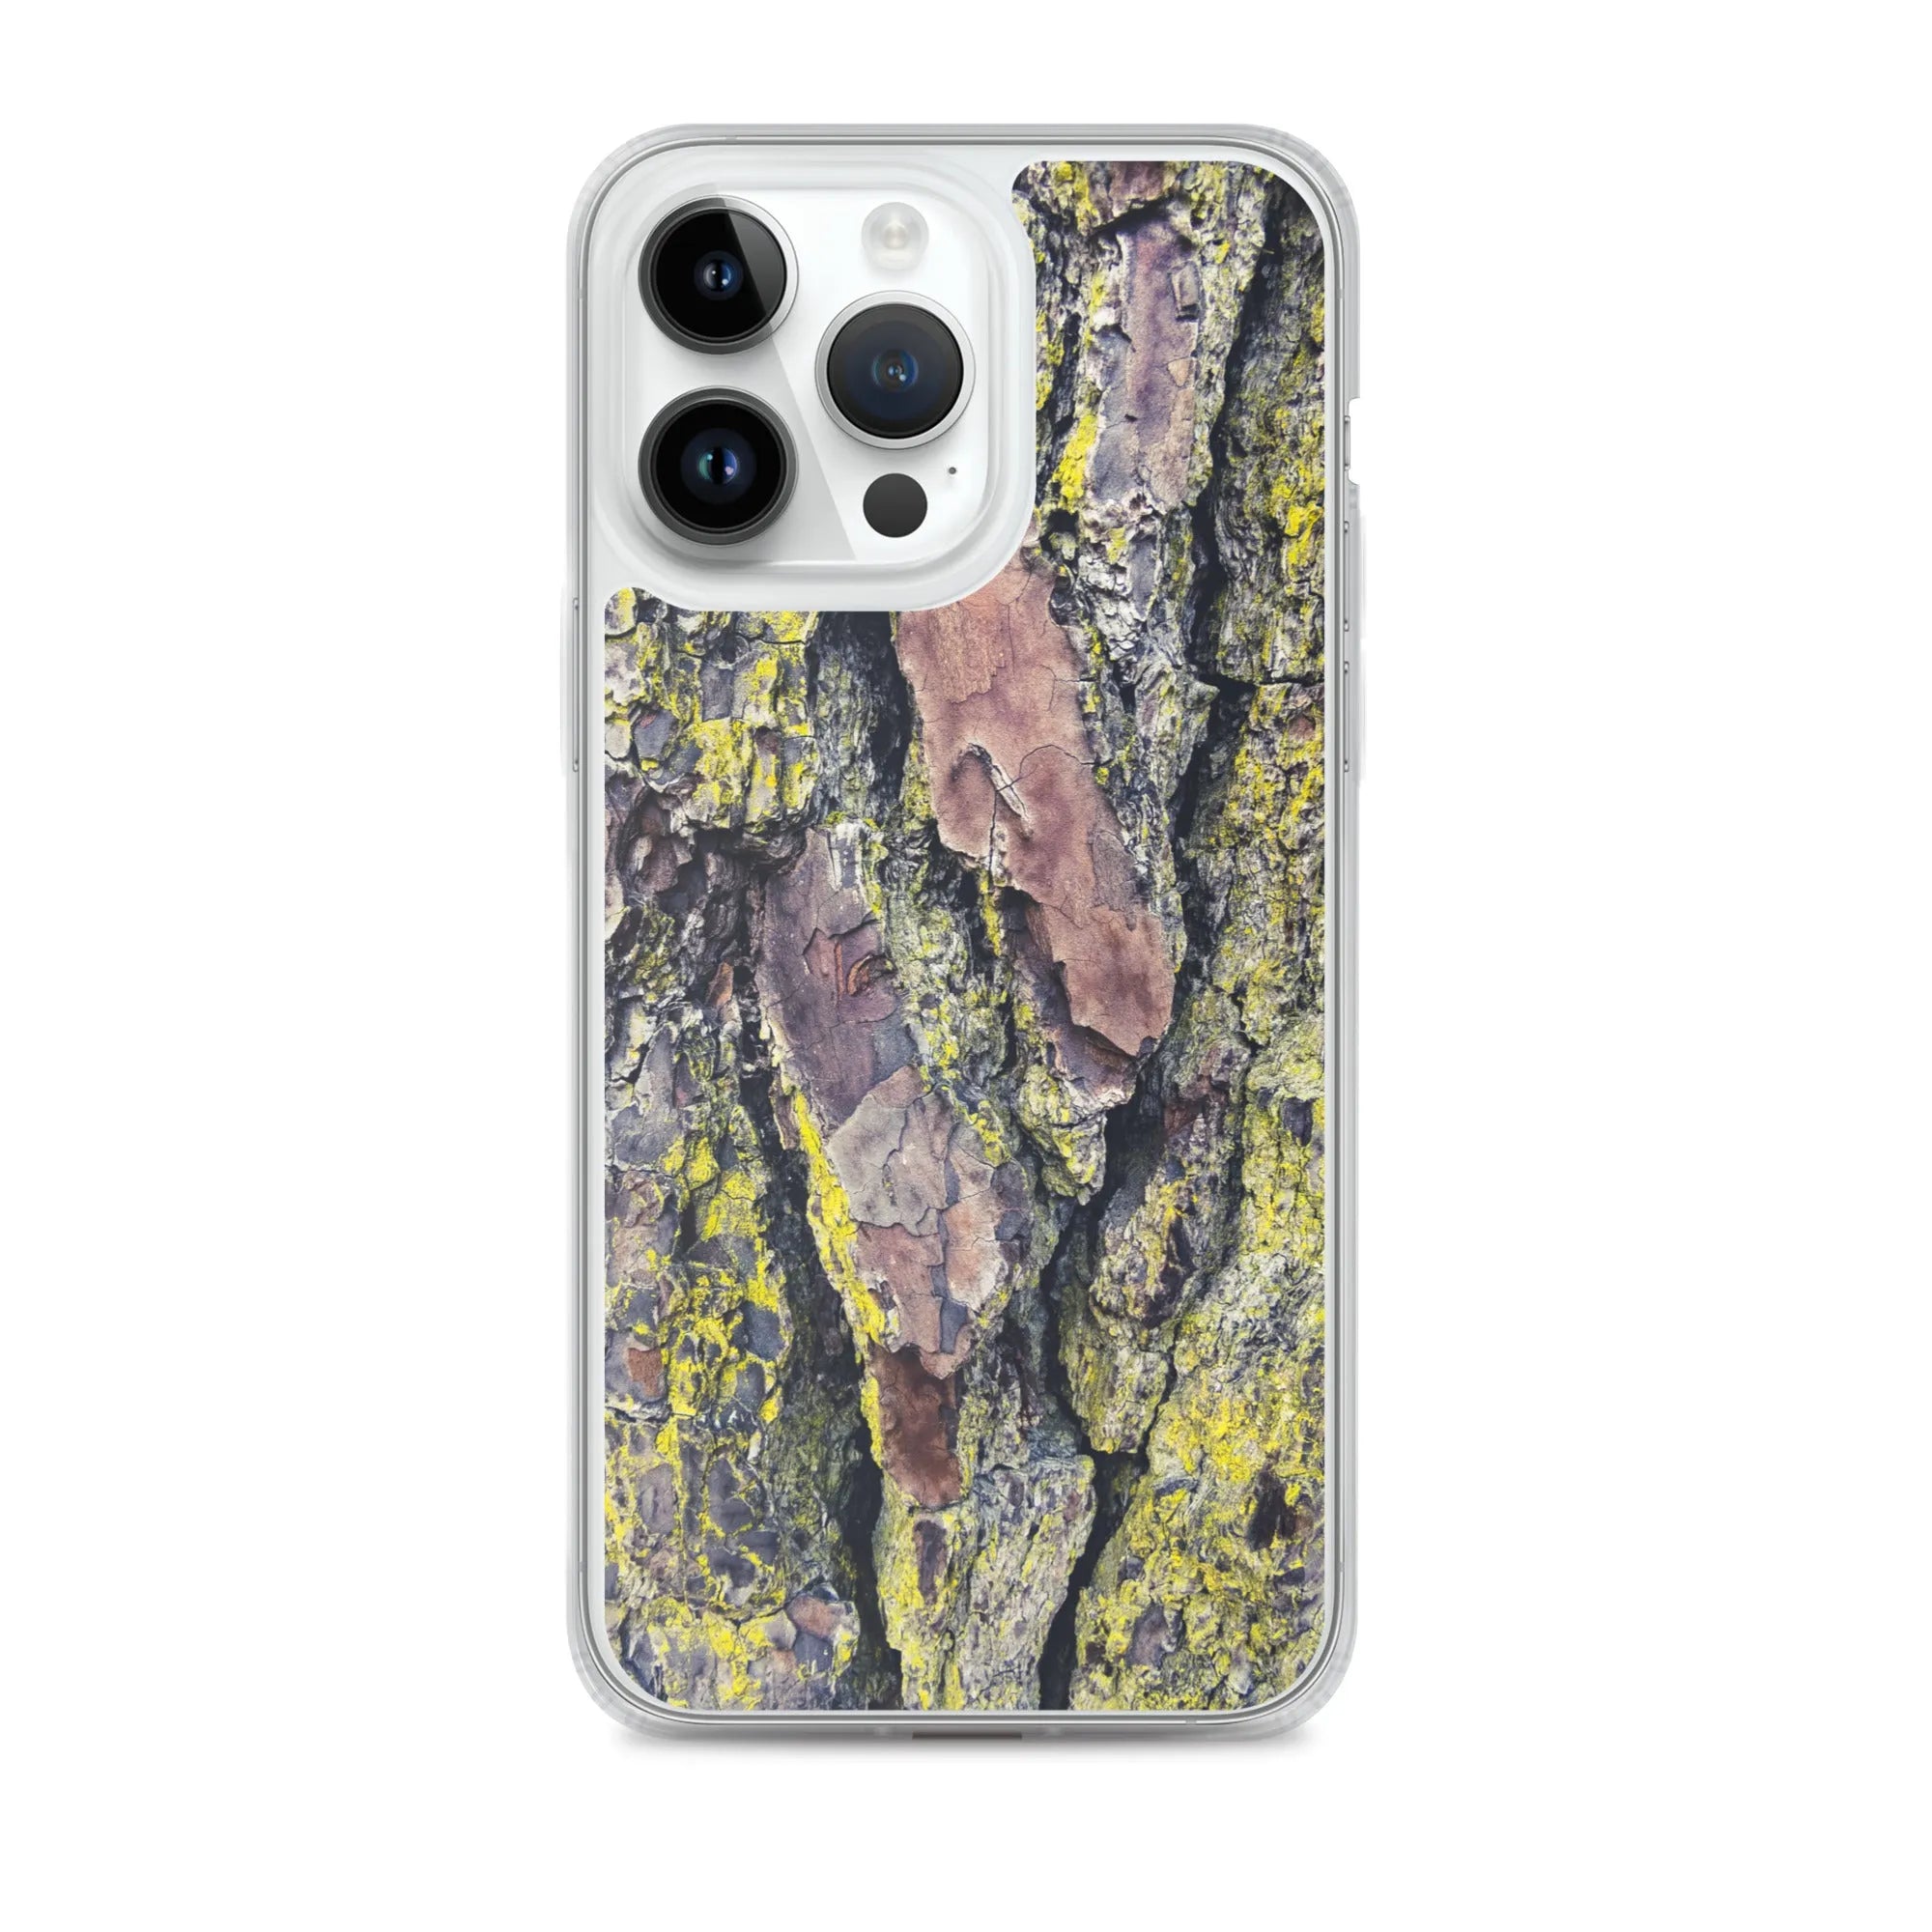 Barking Mad 2 + Too - Botanical Art Pattern Iphone Case - Iphone 14 Pro Max - Mobile Phone Cases - Aesthetic Art